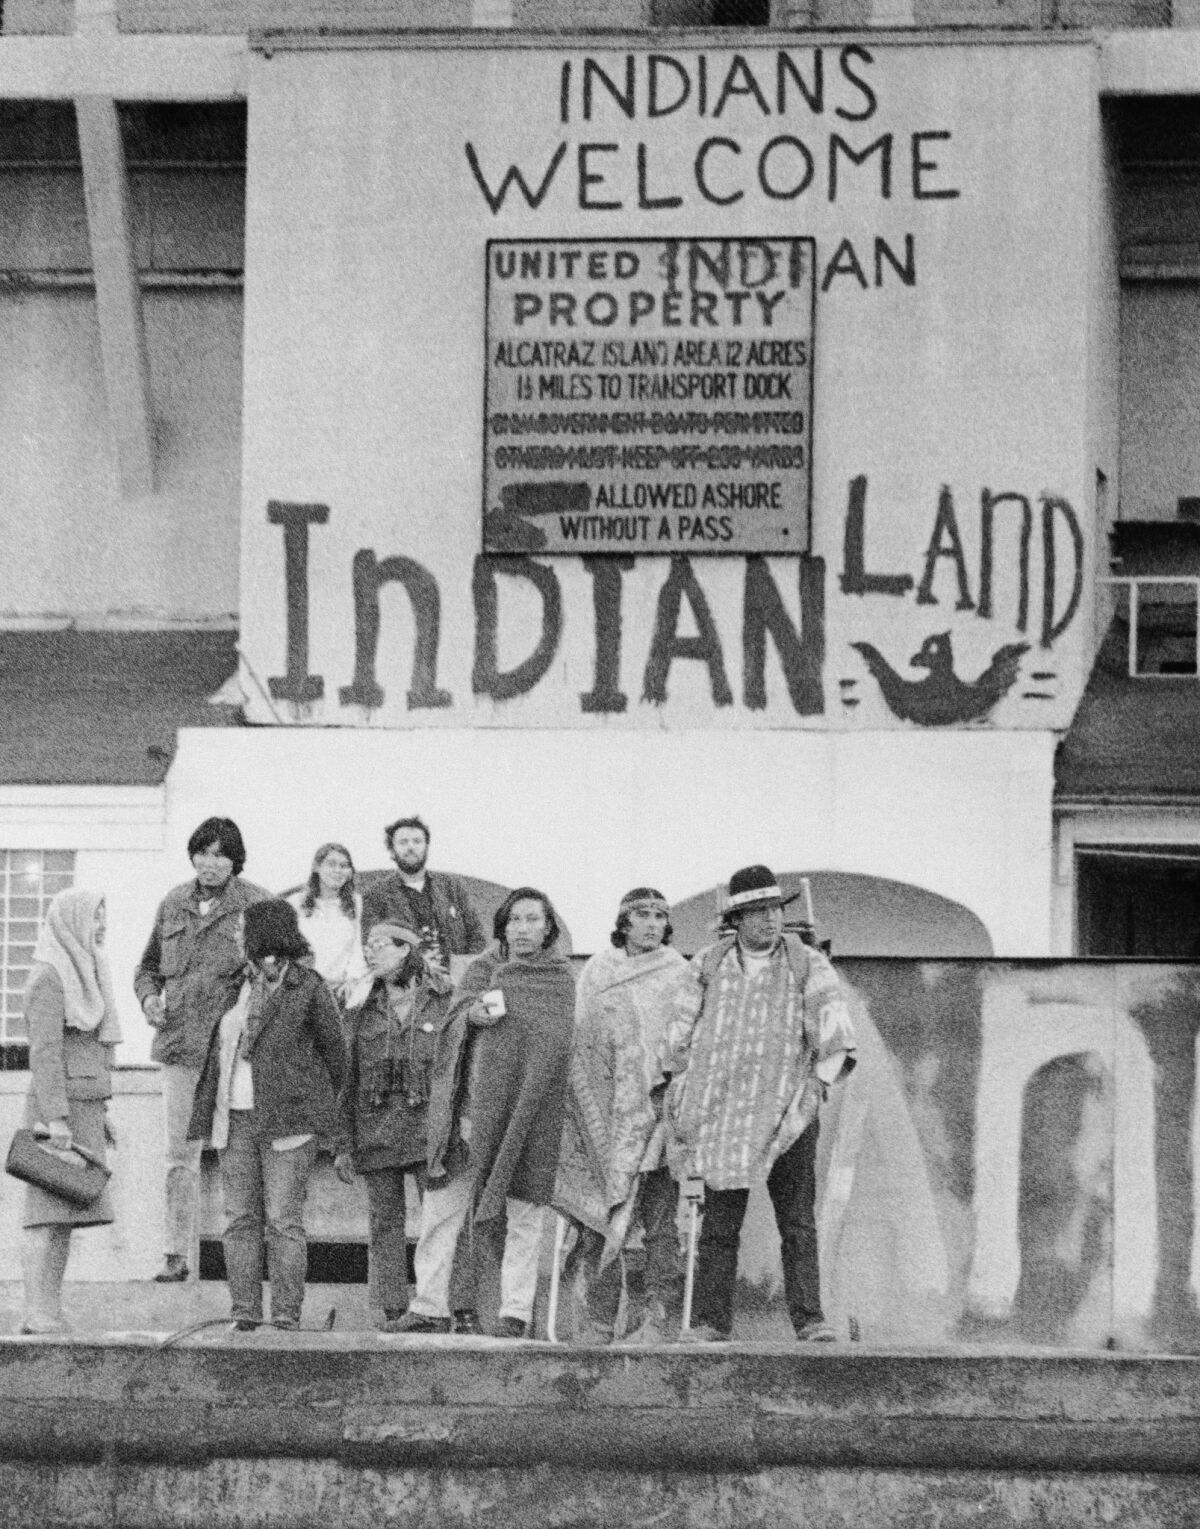 An assortment of Native Americans, part of the 200 who occupied the former prison island of Alcatraz in San Francisco, stand under signs painted at dockside, Nov. 25, 1969.